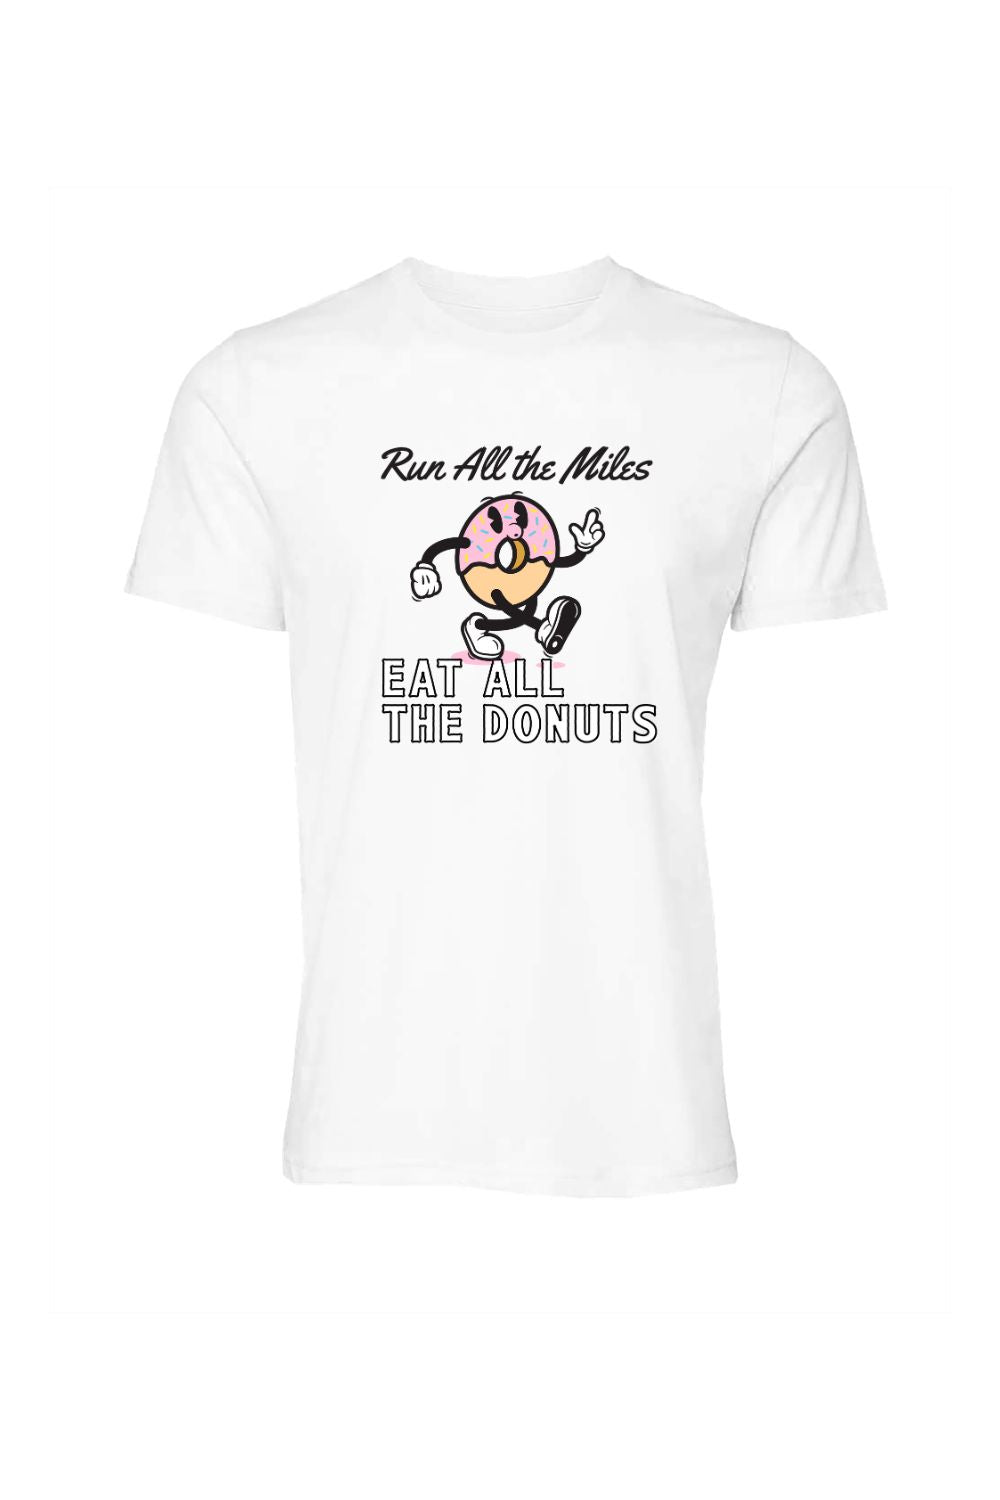 Run All The Miles, Eat All The Donuts T-Shirt